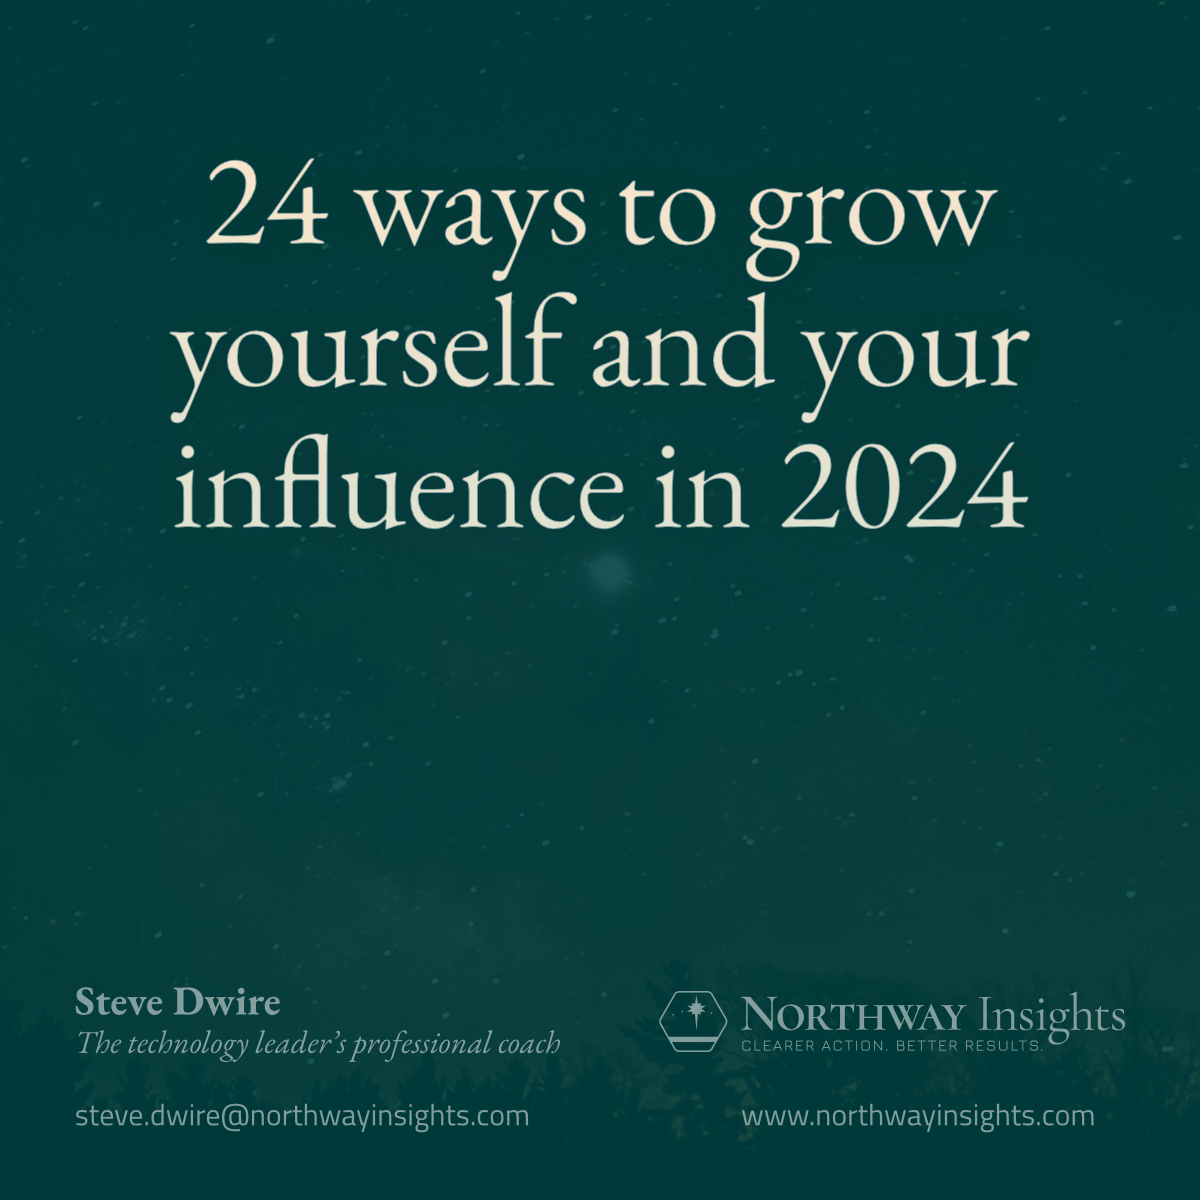 24 ways to grow yourself and your influence in 2024